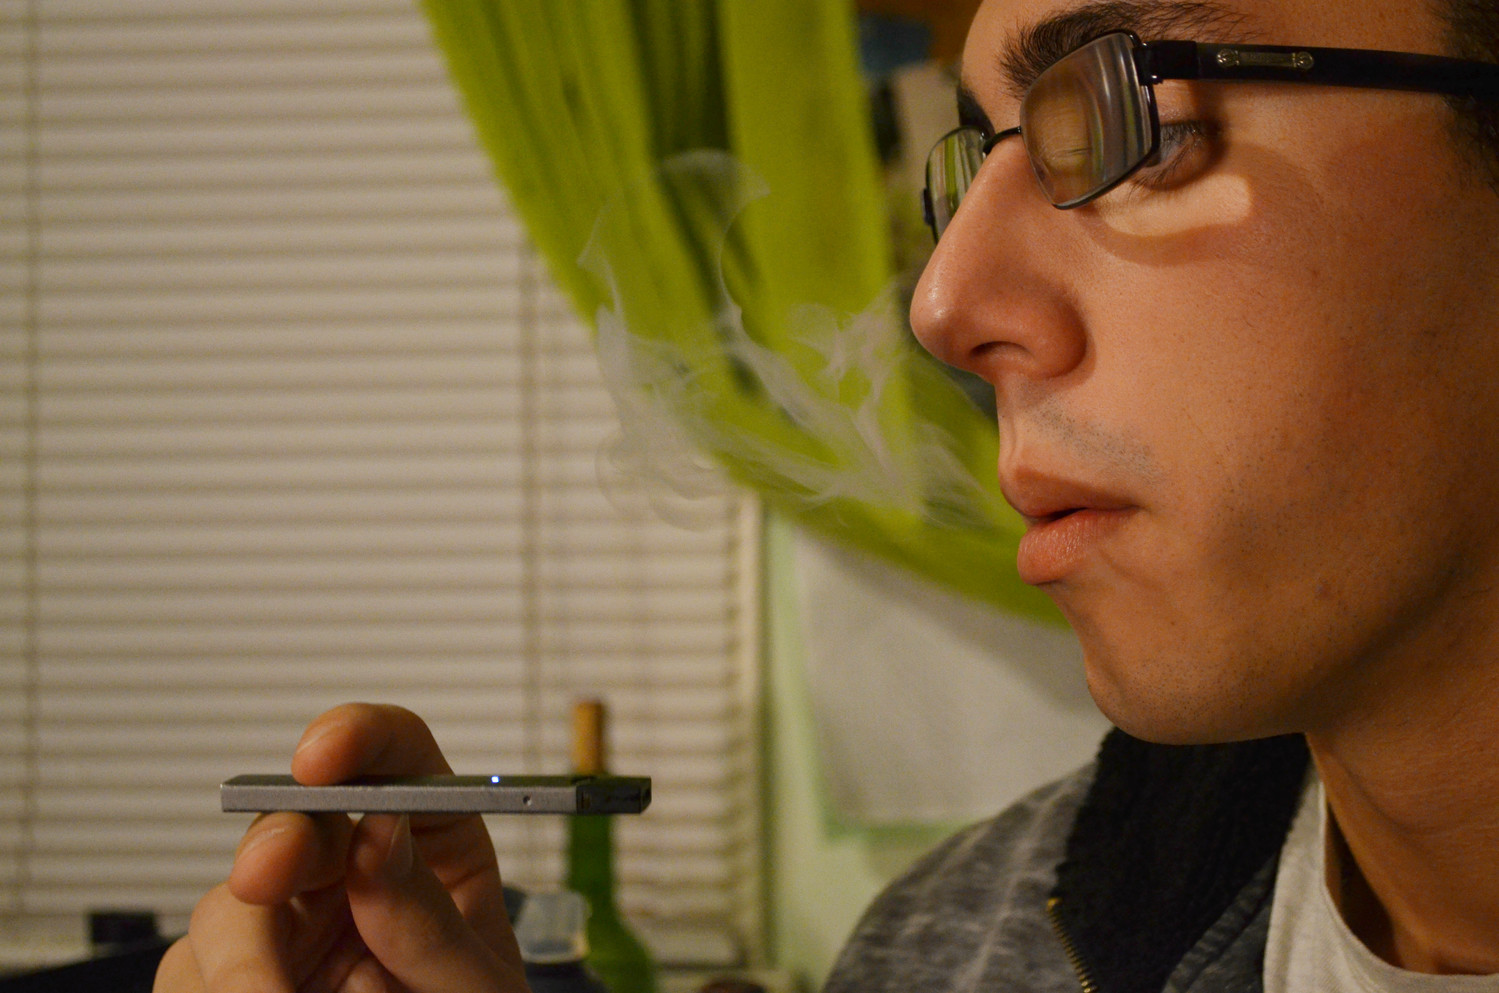 Tyler Calabrese, 20, of Merrick, used an e-cigarette. Although the legal age to buy tobacco and liquid nicotine products differs across Nassau County, the Town of Hempstead raised the legal age from 18 to 21 earlier this year. The City of Long Beach aims to follow in its footsteps.